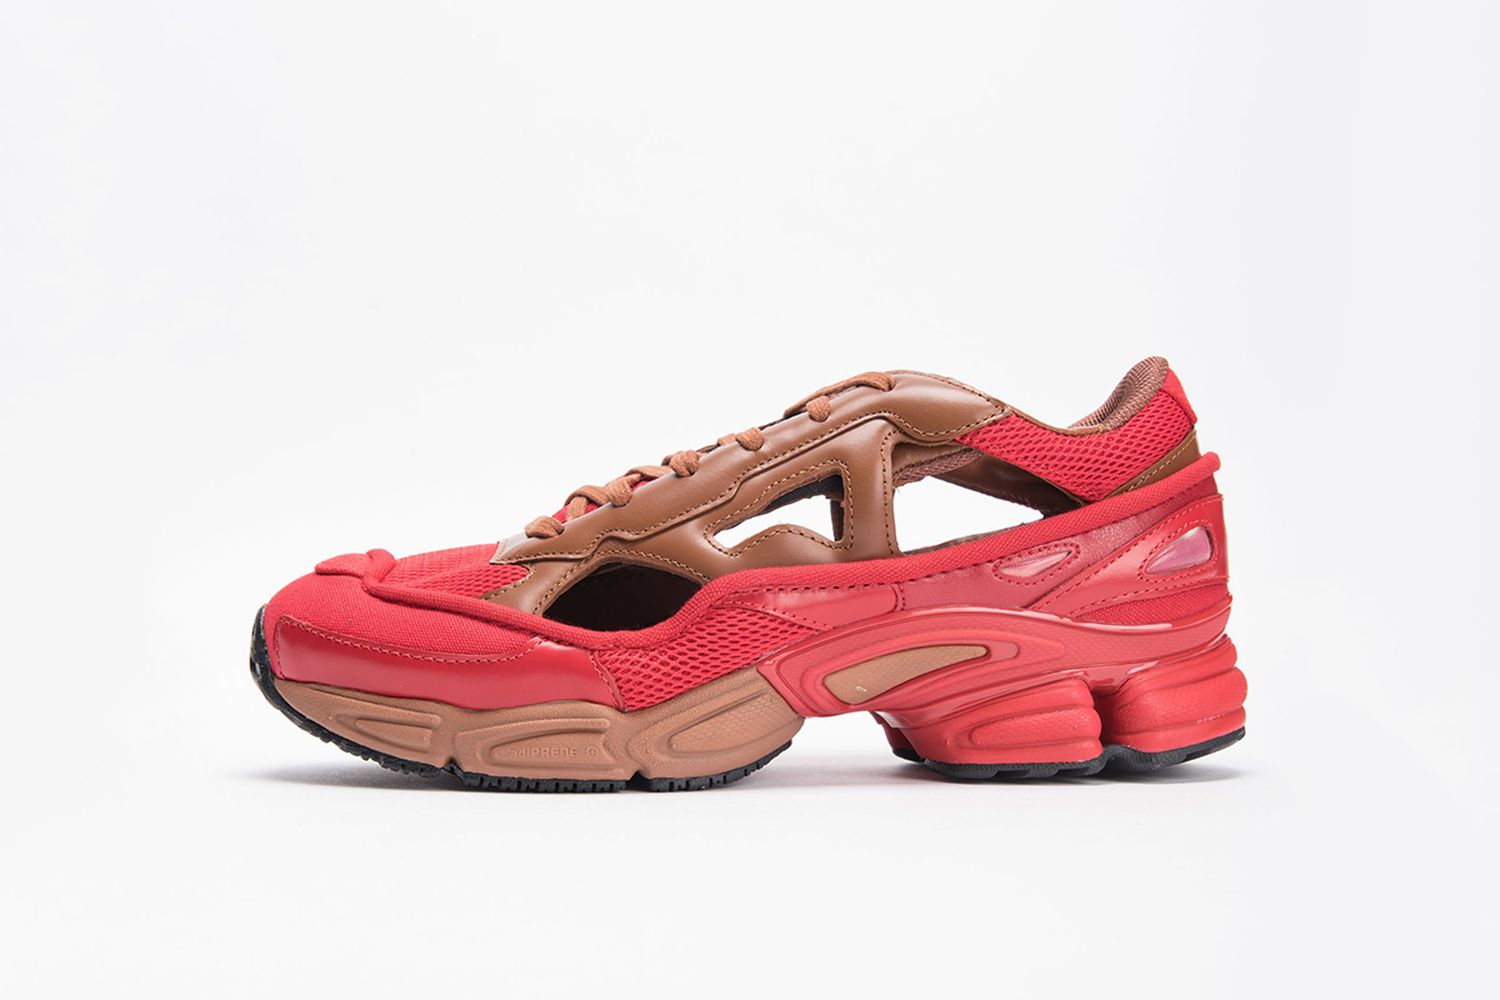 You Can Now Cop this Raf Simons Replicant Ozweego for 70% Off